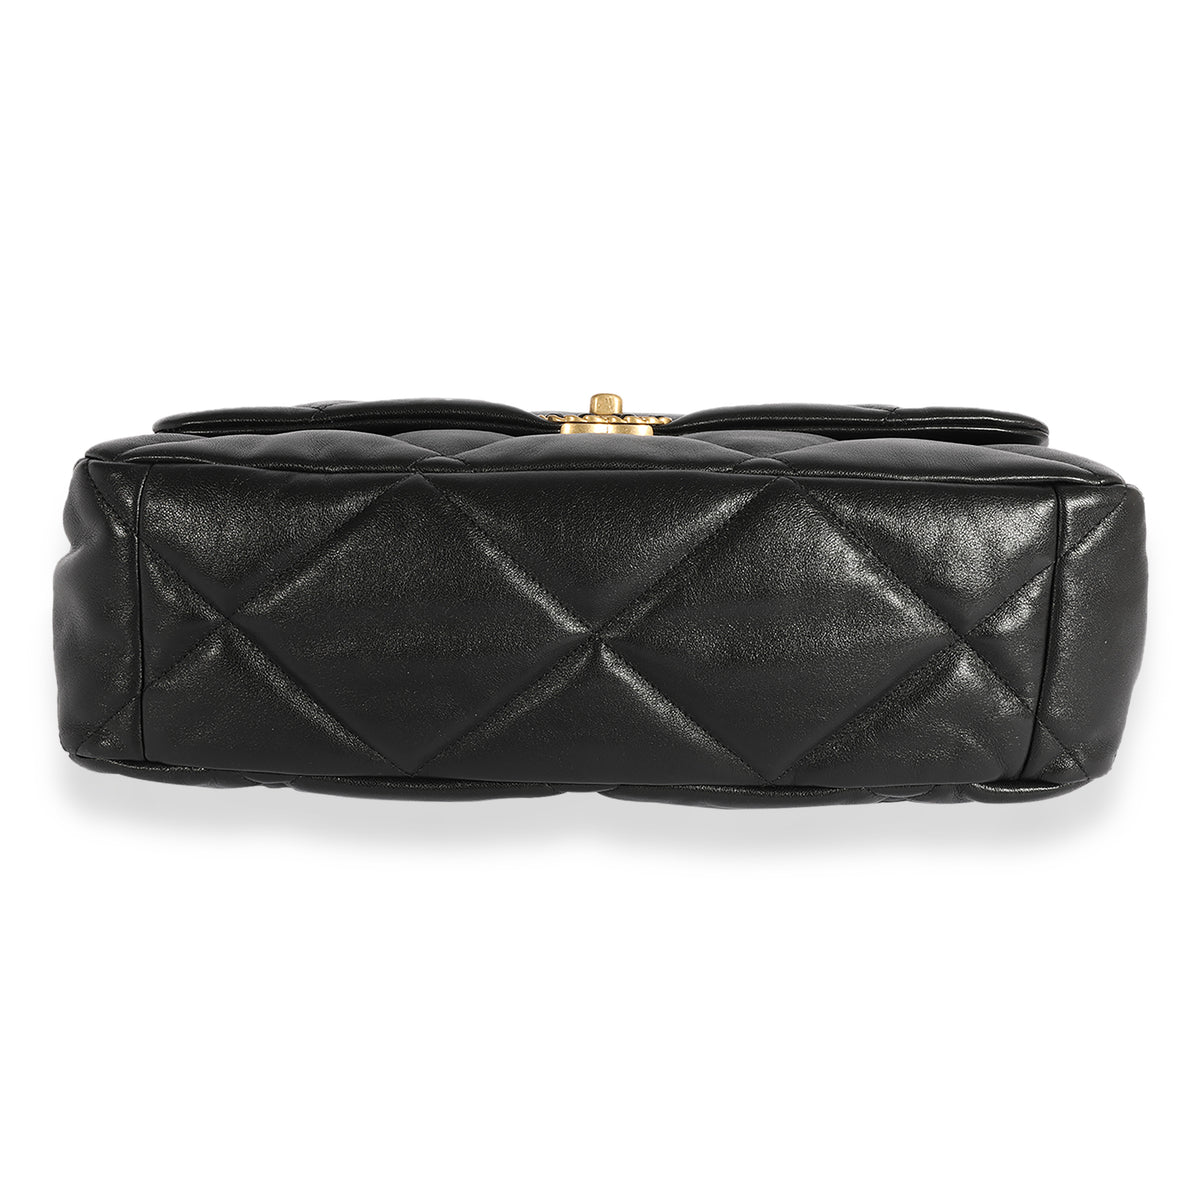 Chanel Black Quilted Lambskin Large Chanel 19 Flap Bag, myGemma, IT